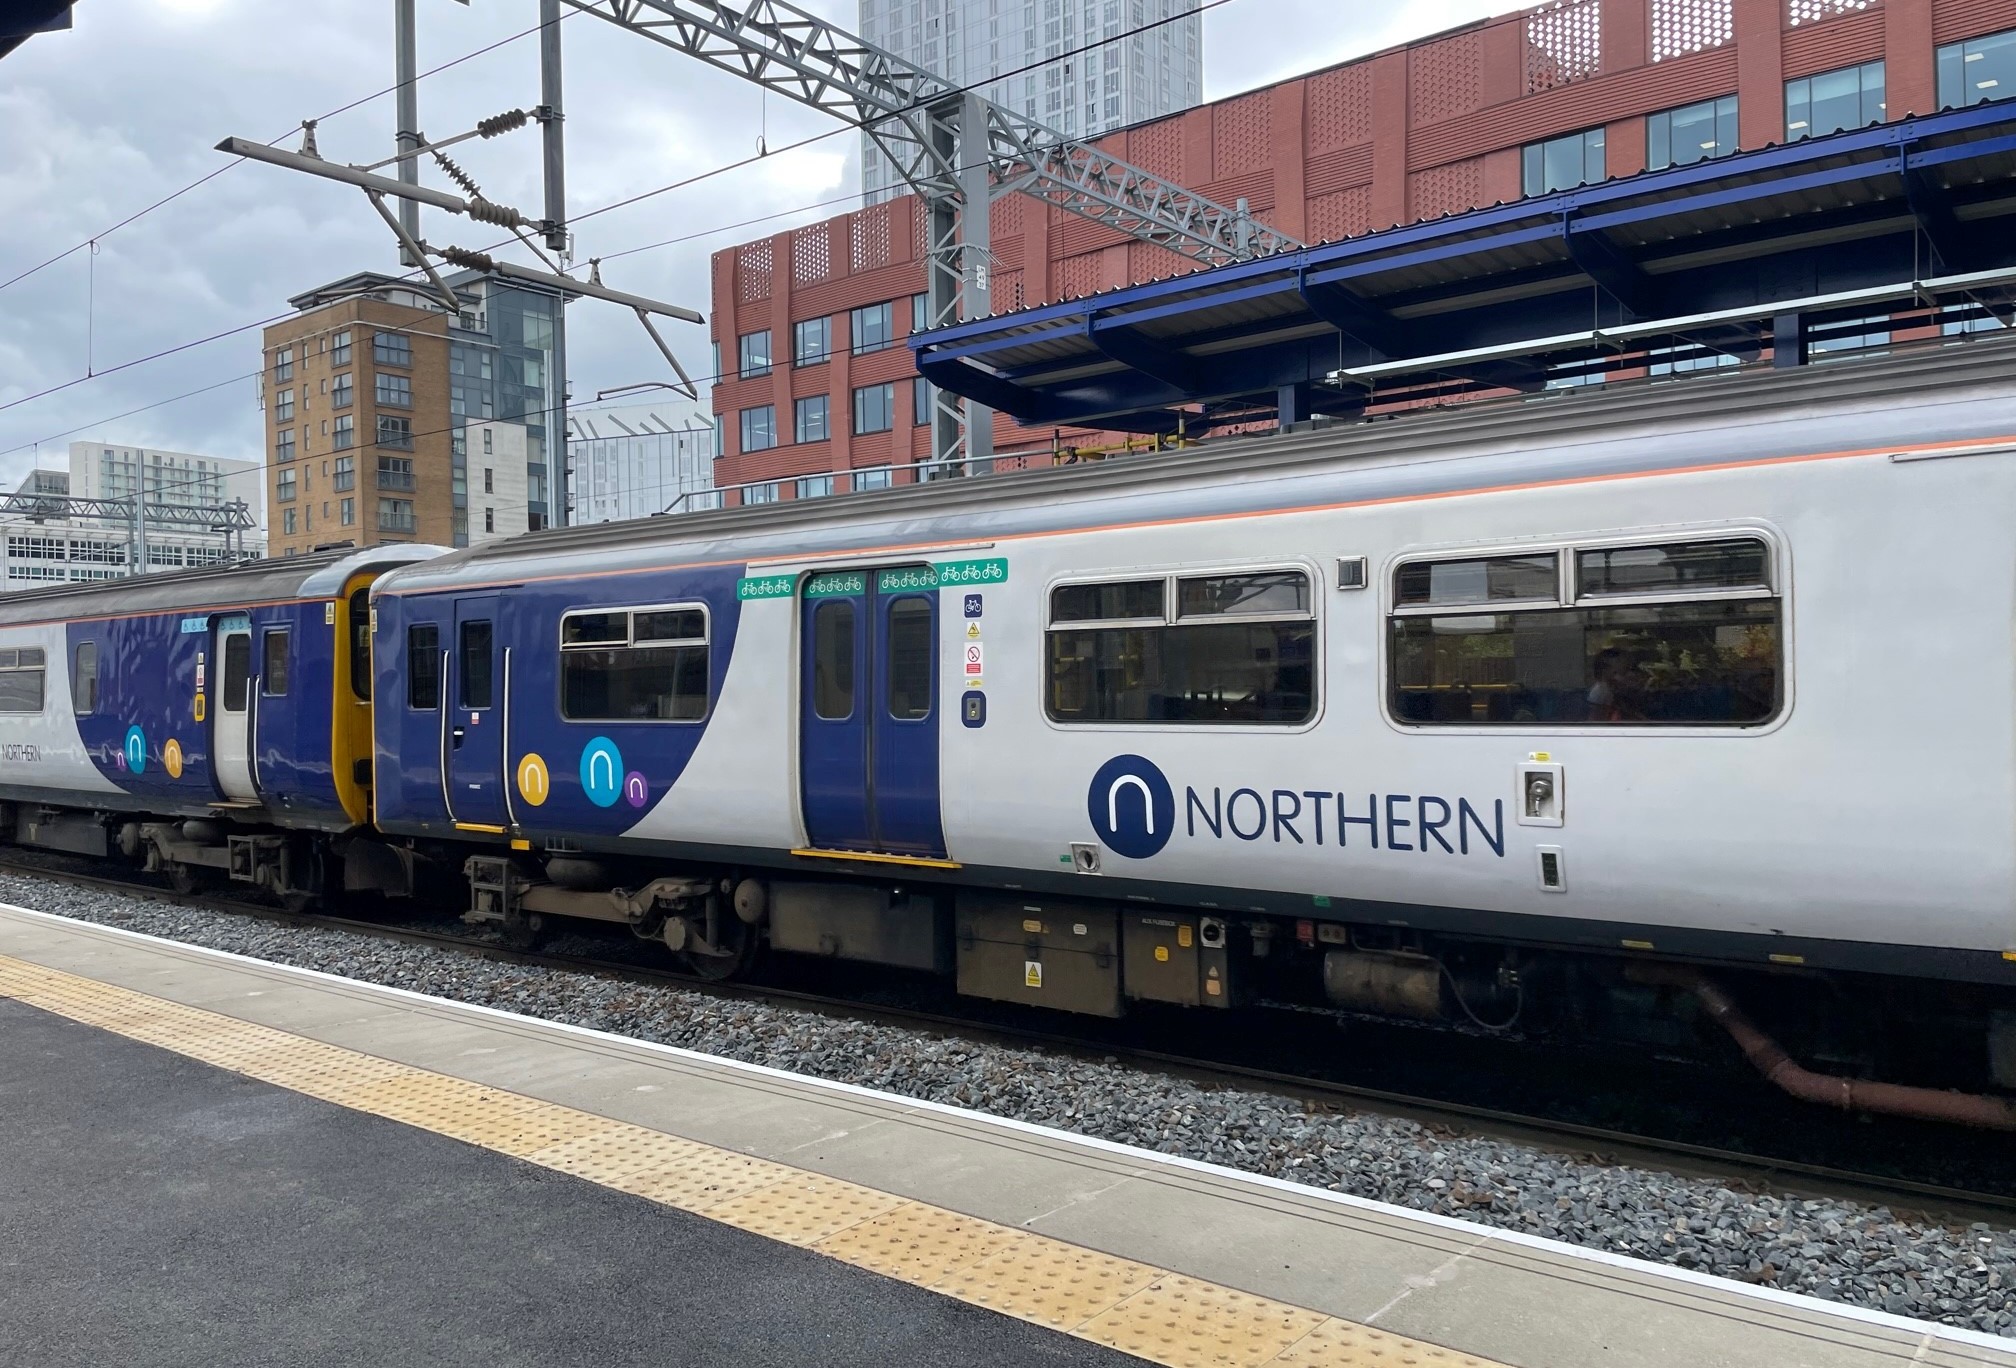 image-shows-northern-service-at-salford-central-station